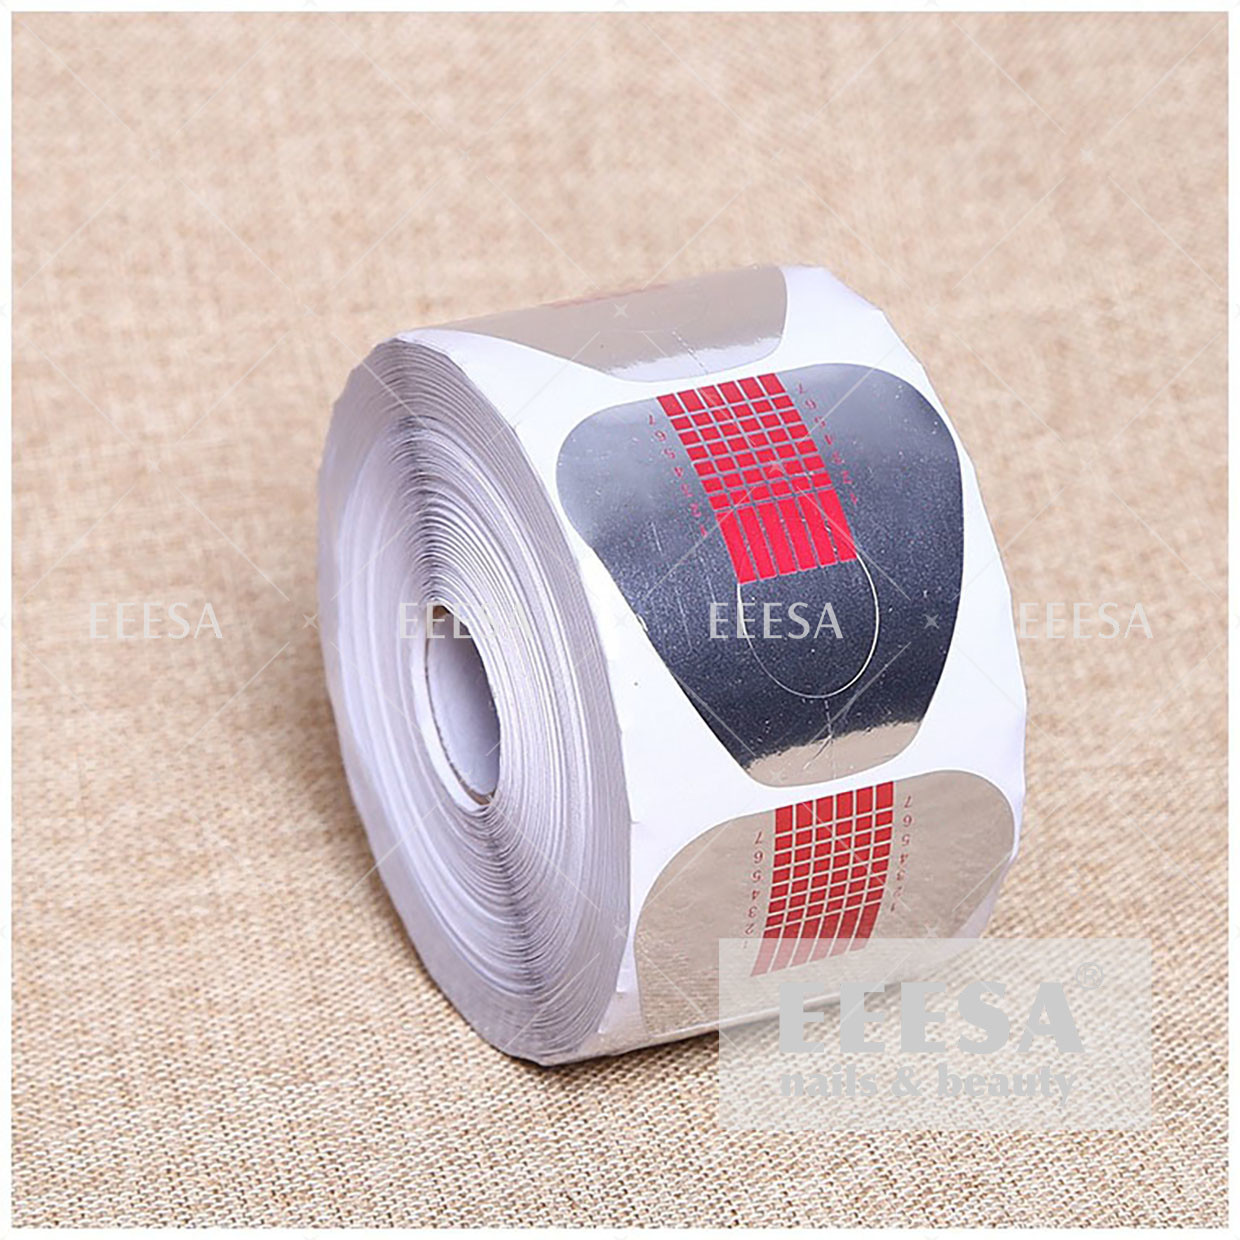  Horseshoes Nail Extension Forms High Adhesive Custom Paper Box Packing Manufactures